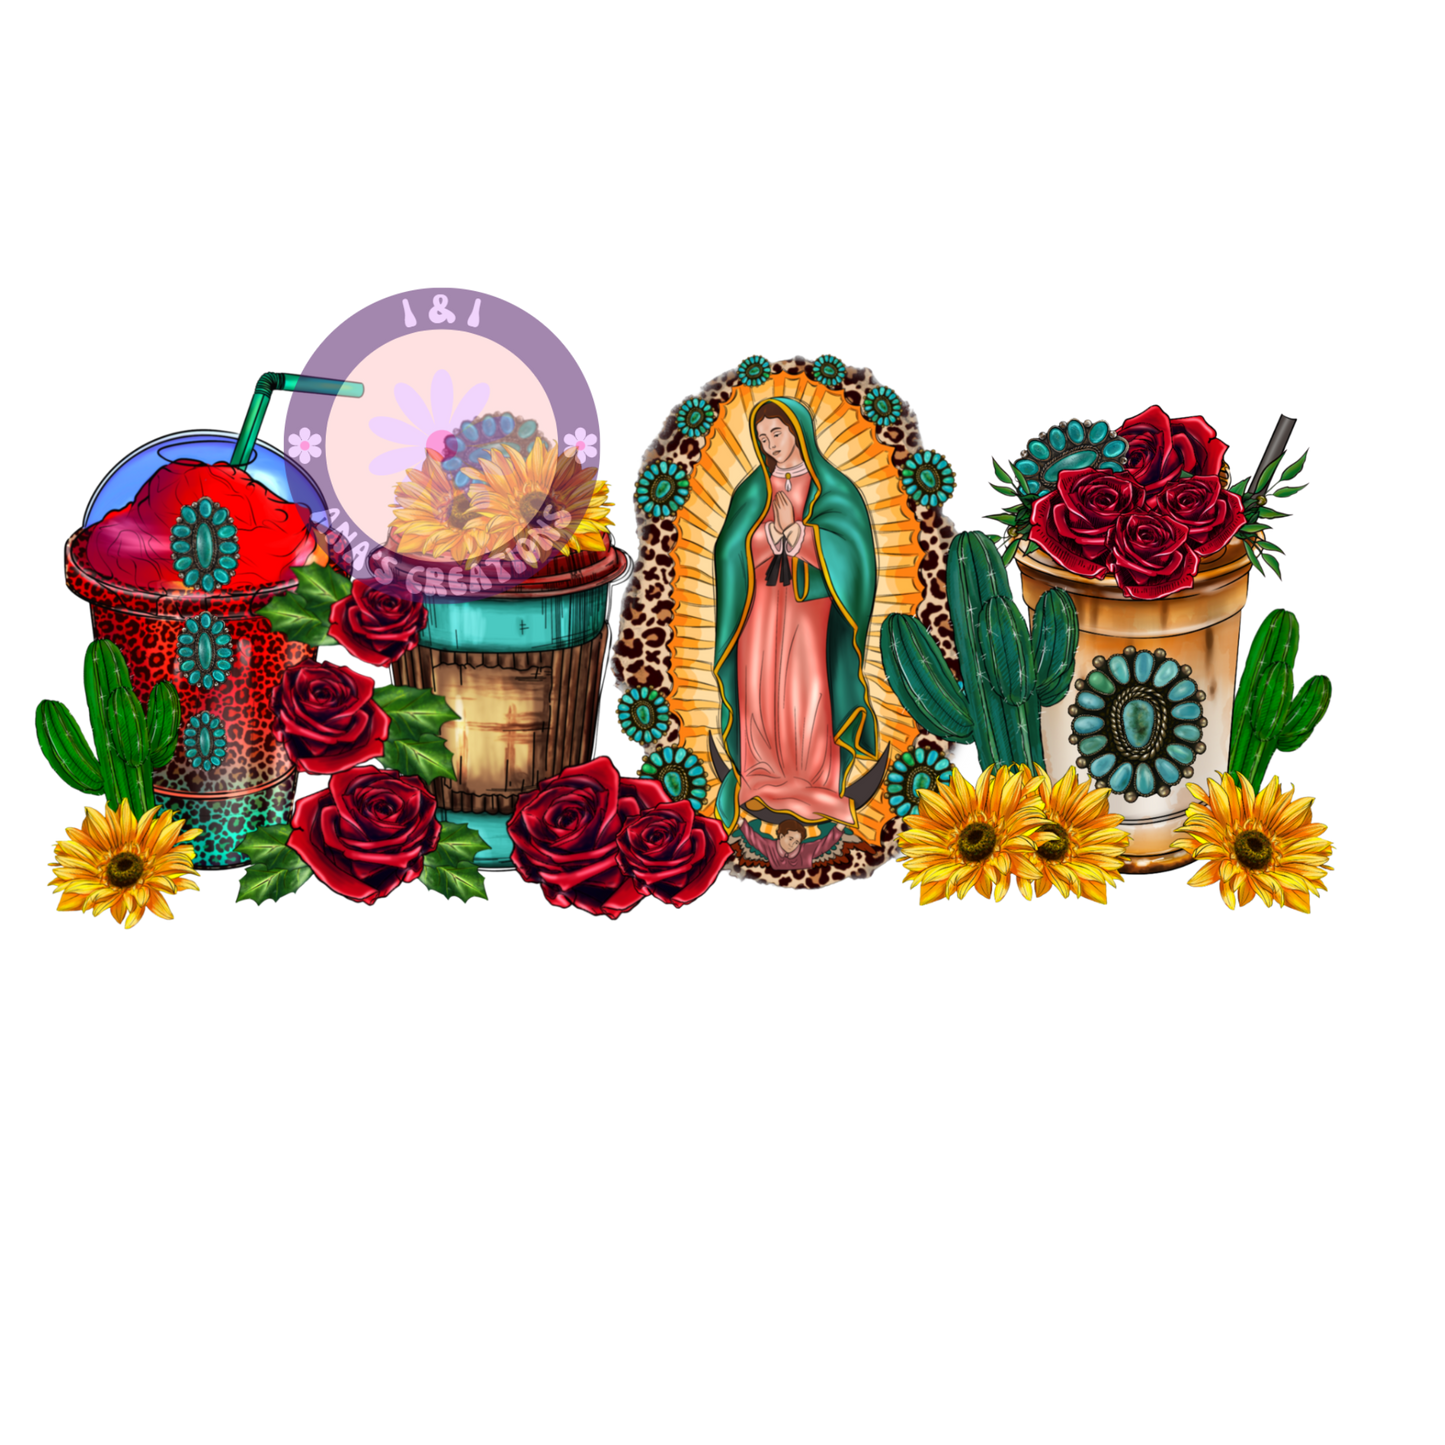 LADY OF GUADALUPE